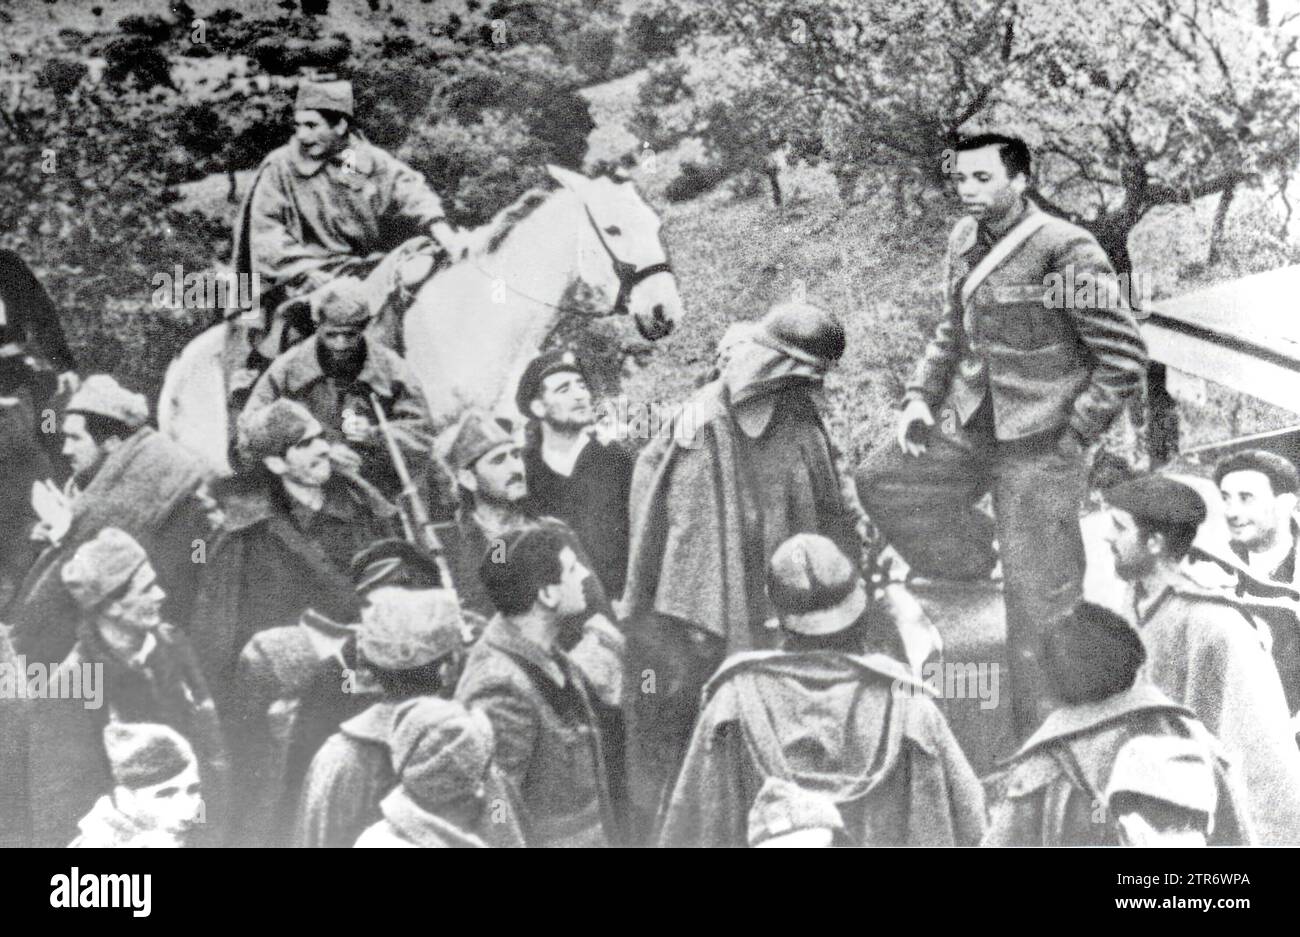 Valencia, 1937. The poet Miguel Hernández harangues the troops during the Spanish Civil War. Credit: Album / Archivo ABC Stock Photo